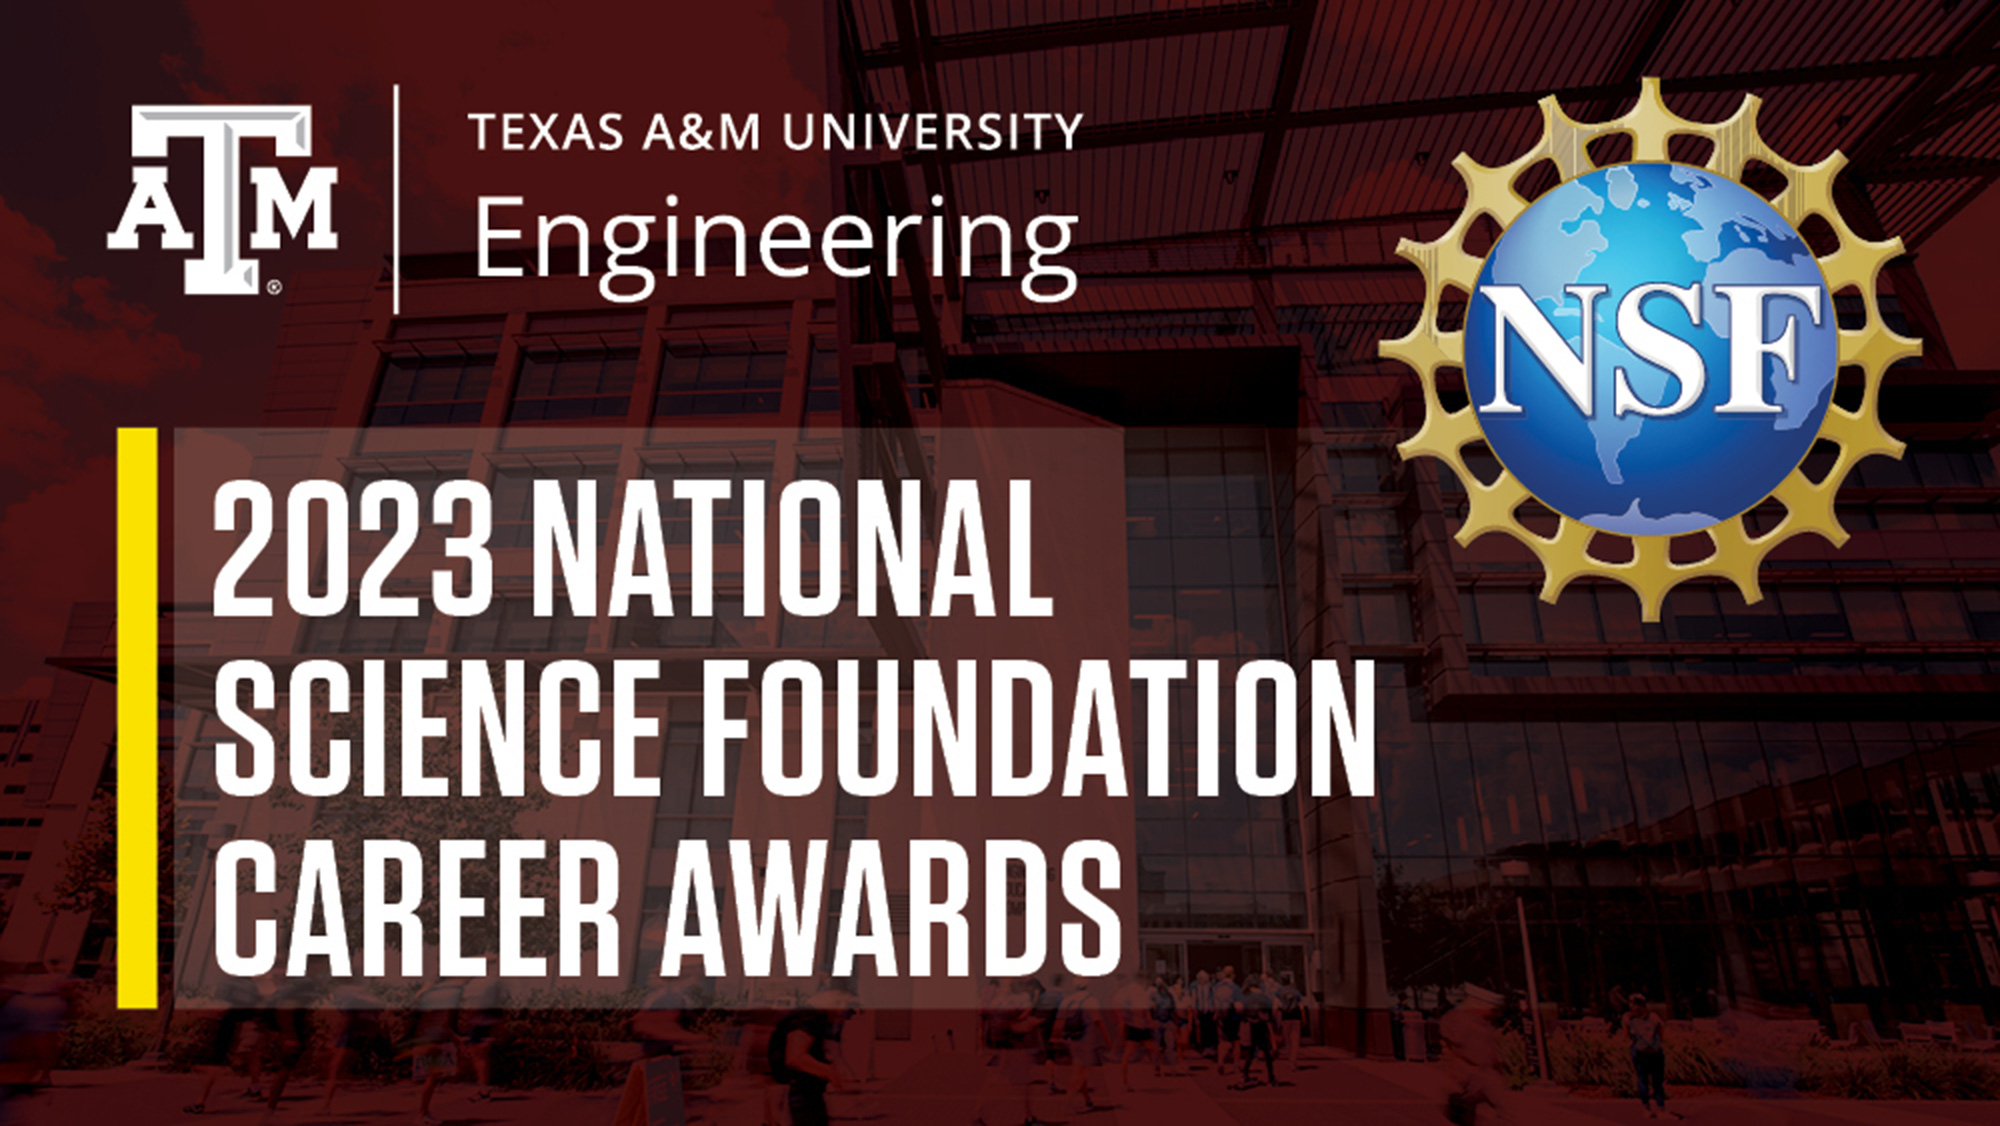 Digitally rendered graphic on a maroon background that states "2023 National Science Foundation Career Awards" with the symbol for the NSF.